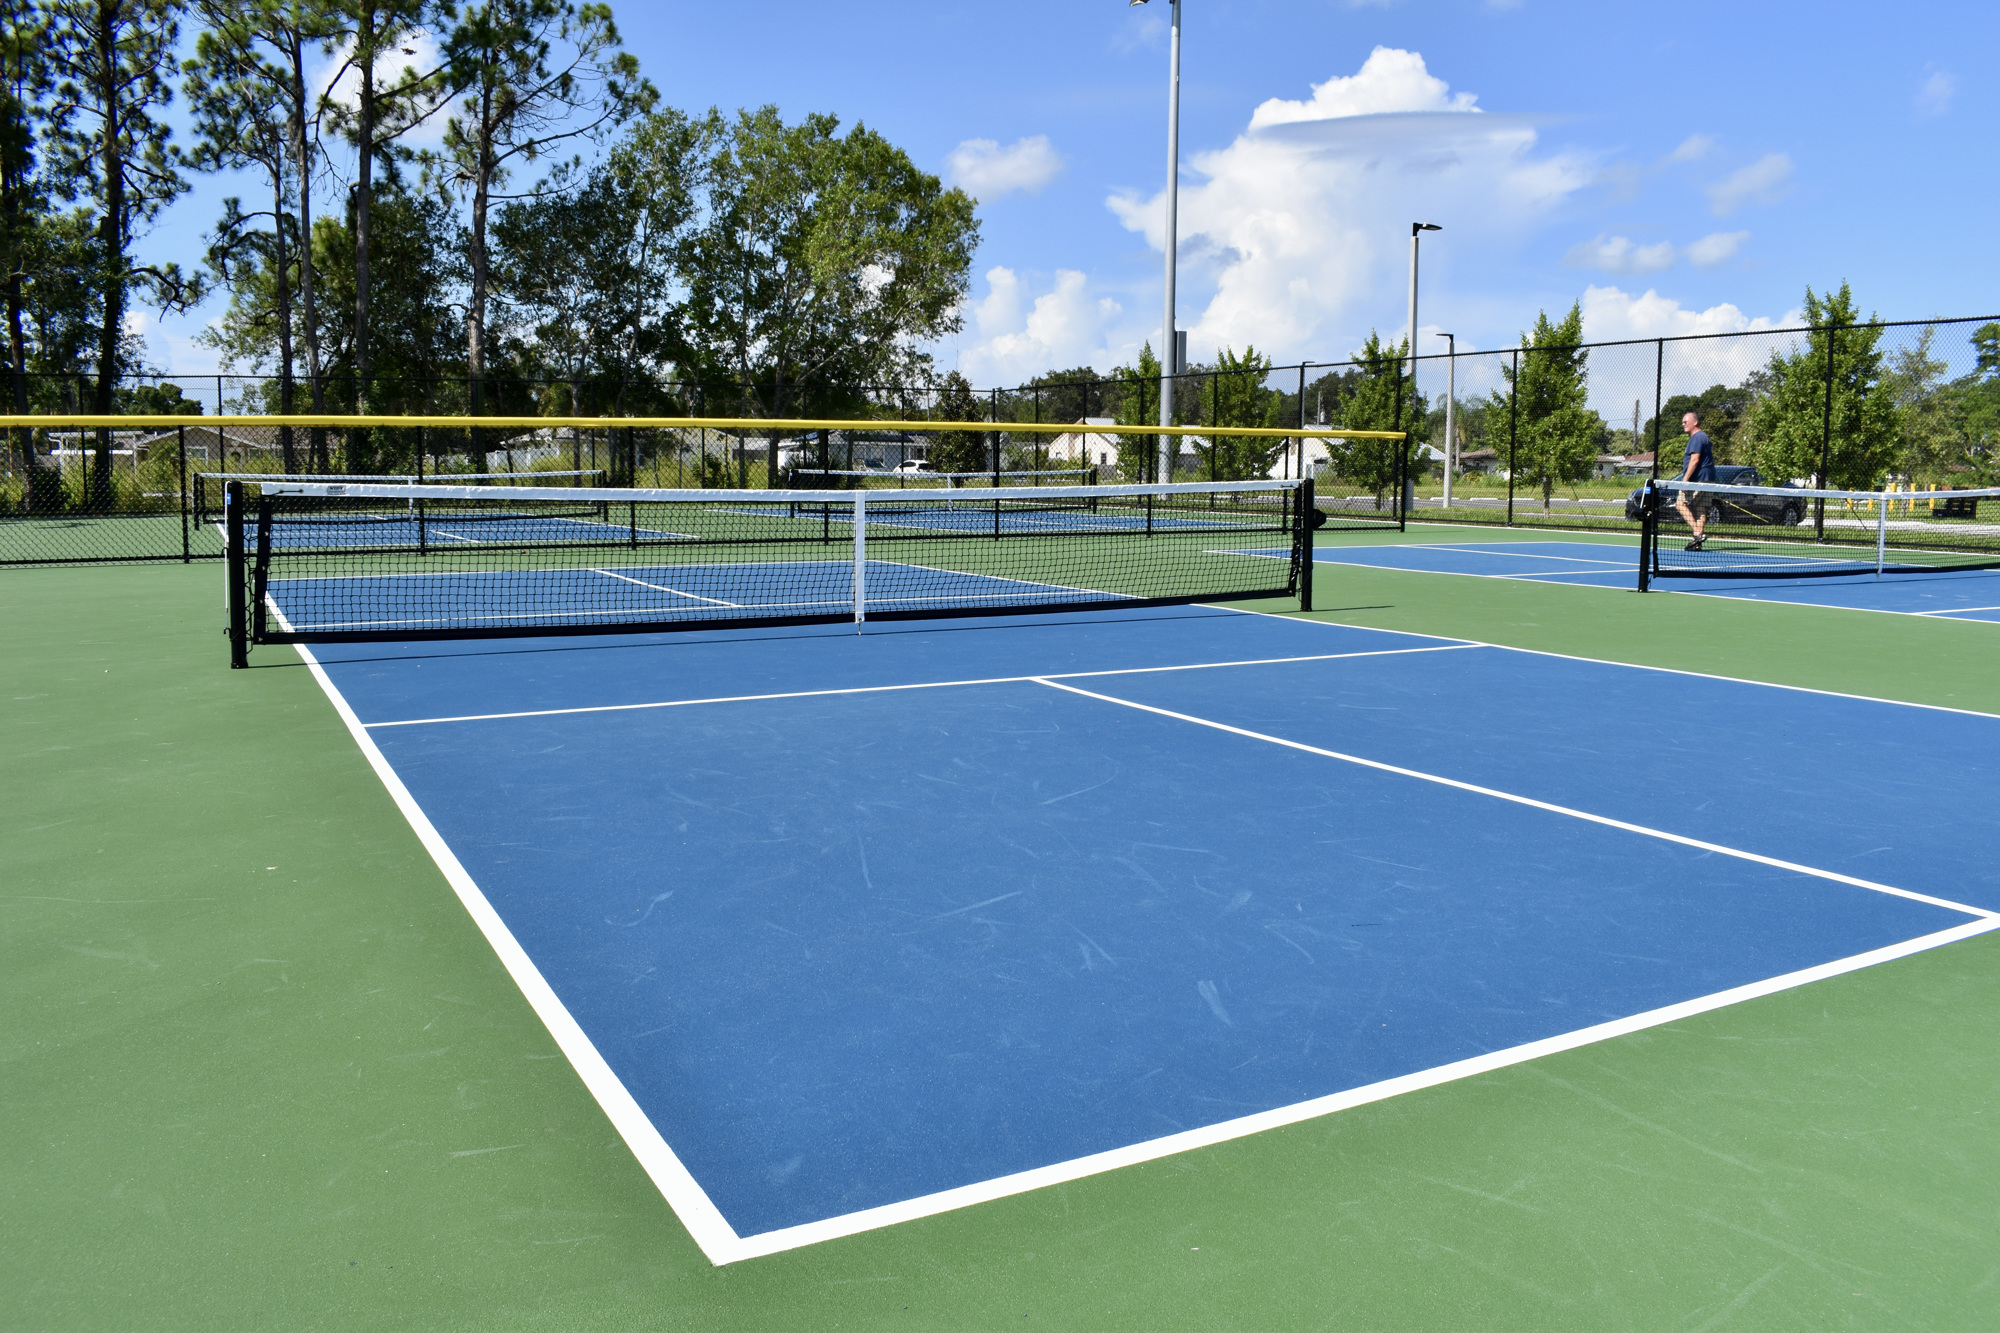 12 lighted pickleball courts serve as the centerpiece of the Pompano Trailhead. (Photo by Eric Garwood)